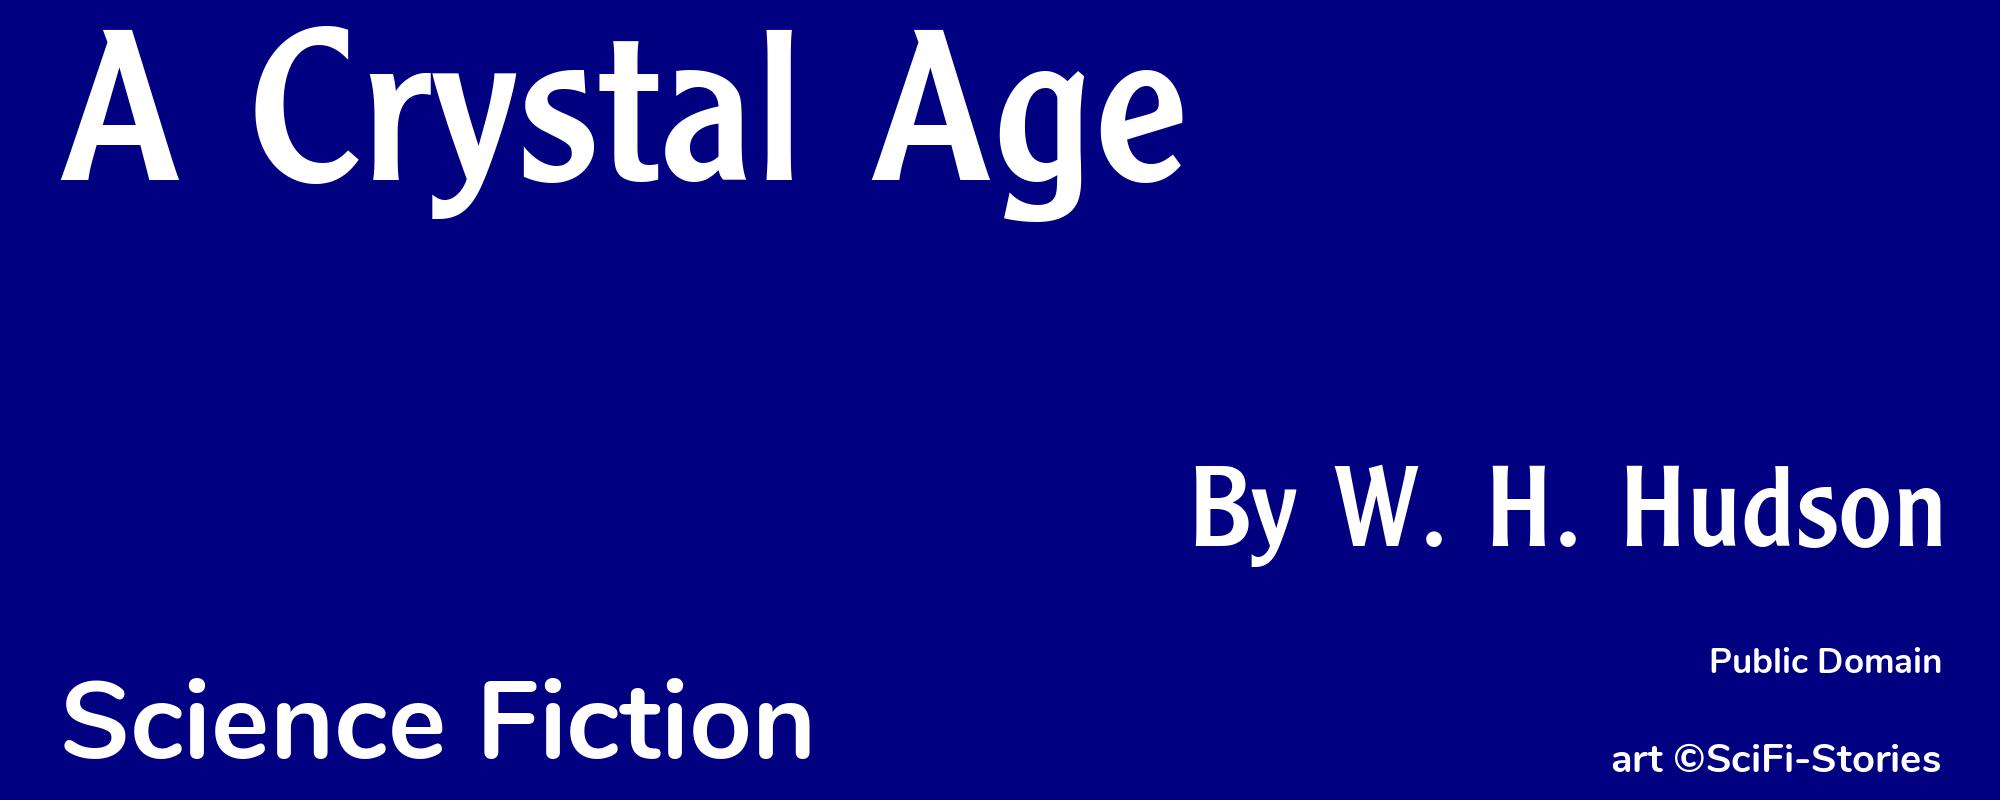 A Crystal Age - Cover